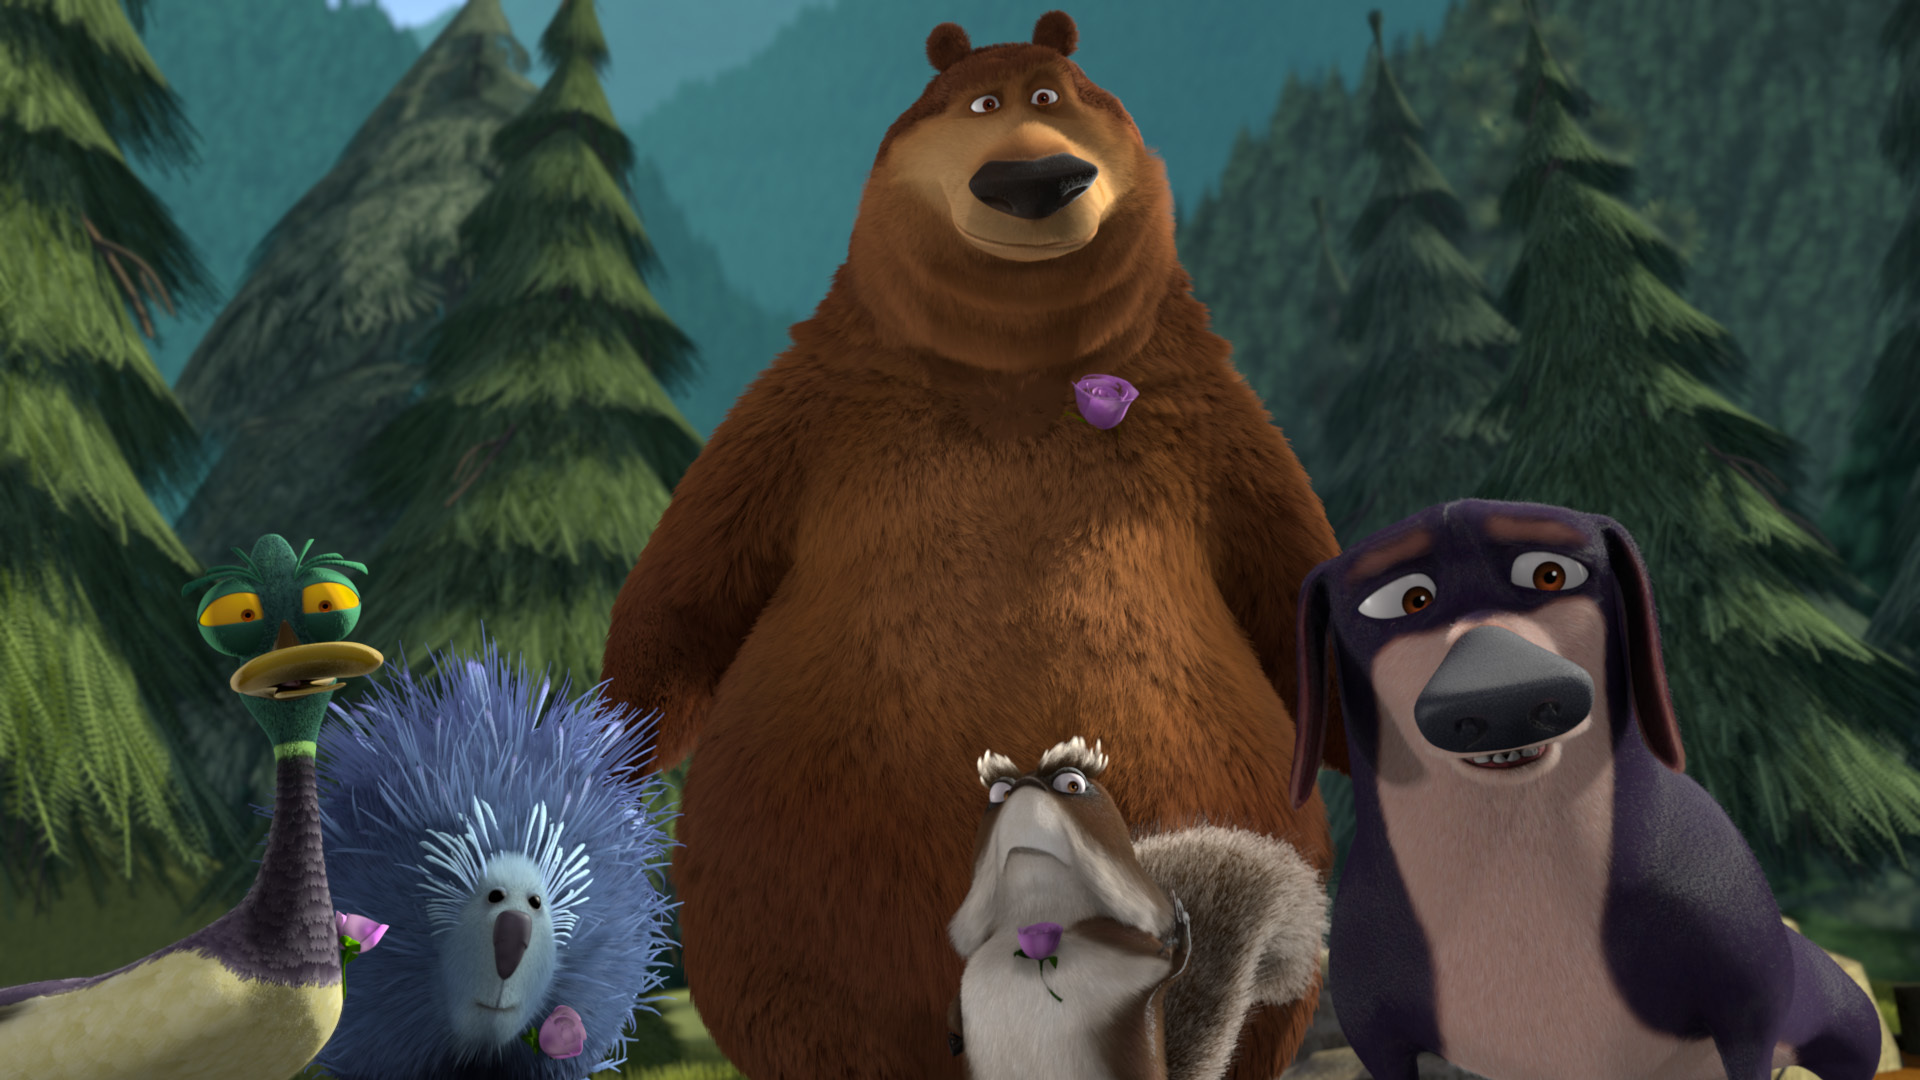 Open Season / Open Season 2 / Open Season 3 / Open Season: Scared Silly (DVD) - image 3 of 5